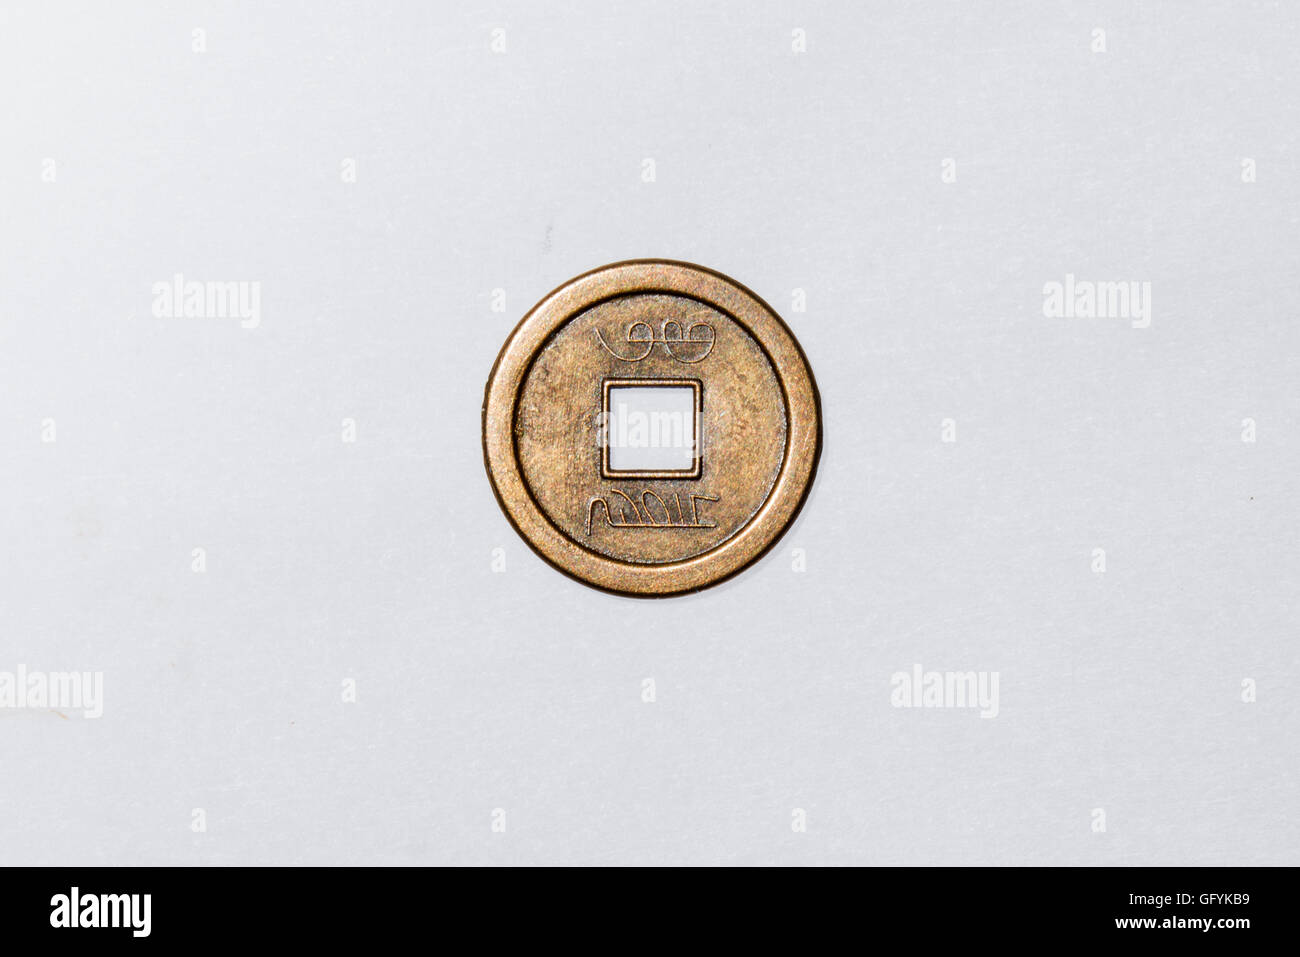 ancient chinese coin isolated on white background Stock Photo